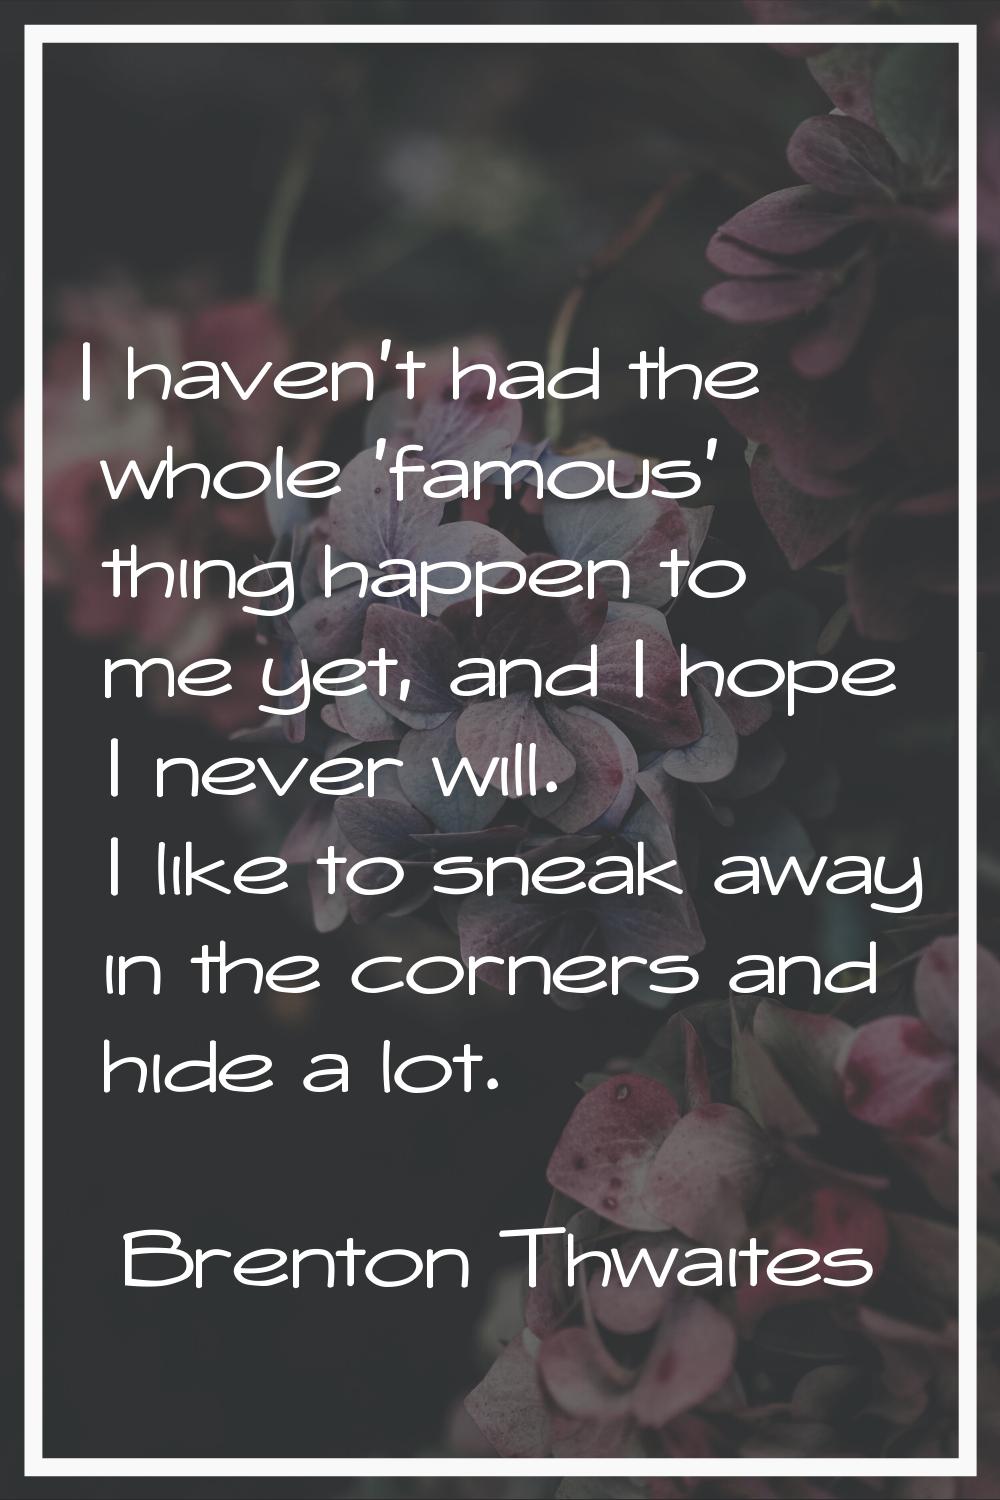 I haven't had the whole 'famous' thing happen to me yet, and I hope I never will. I like to sneak a